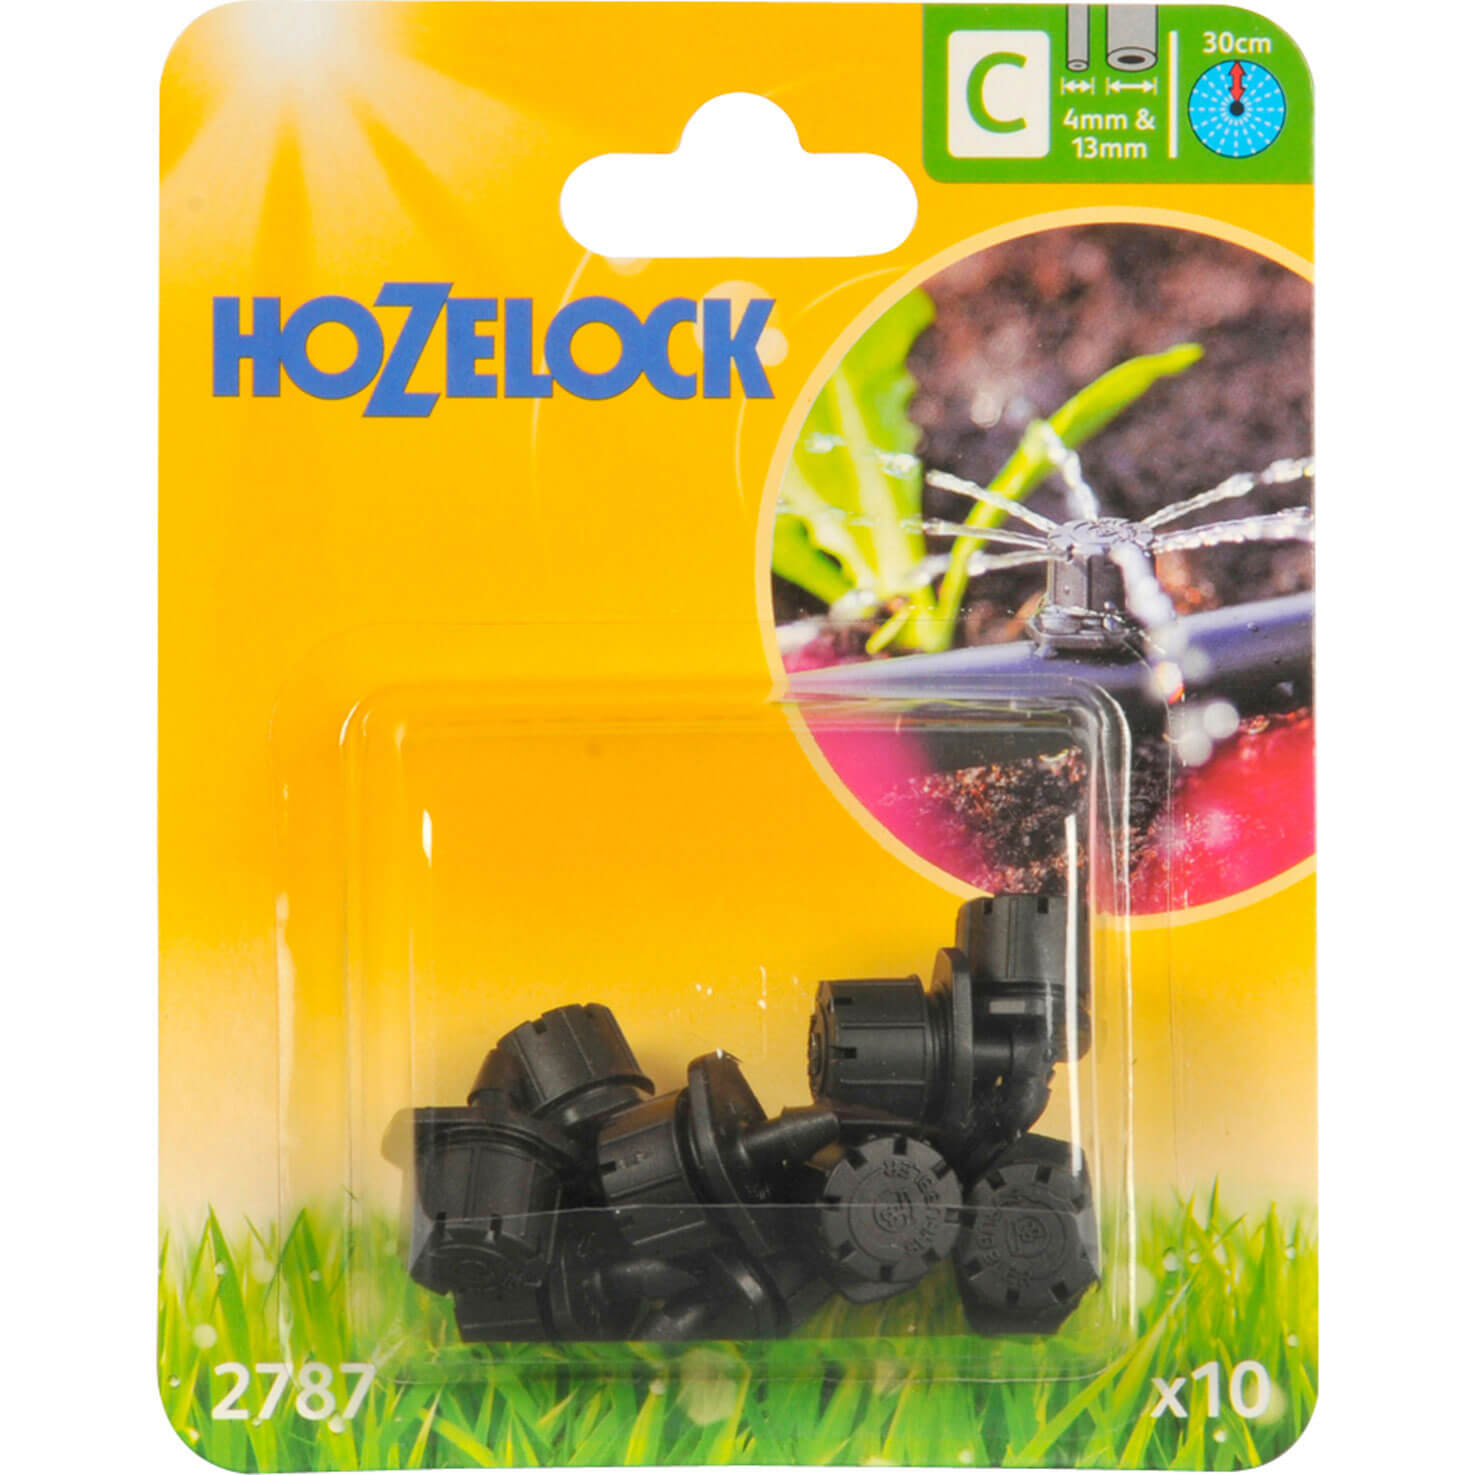 Hozelock End of Line Adjustable Mini Garden Water Sprinkler Pack of 10 for 4mm Auto Watering System